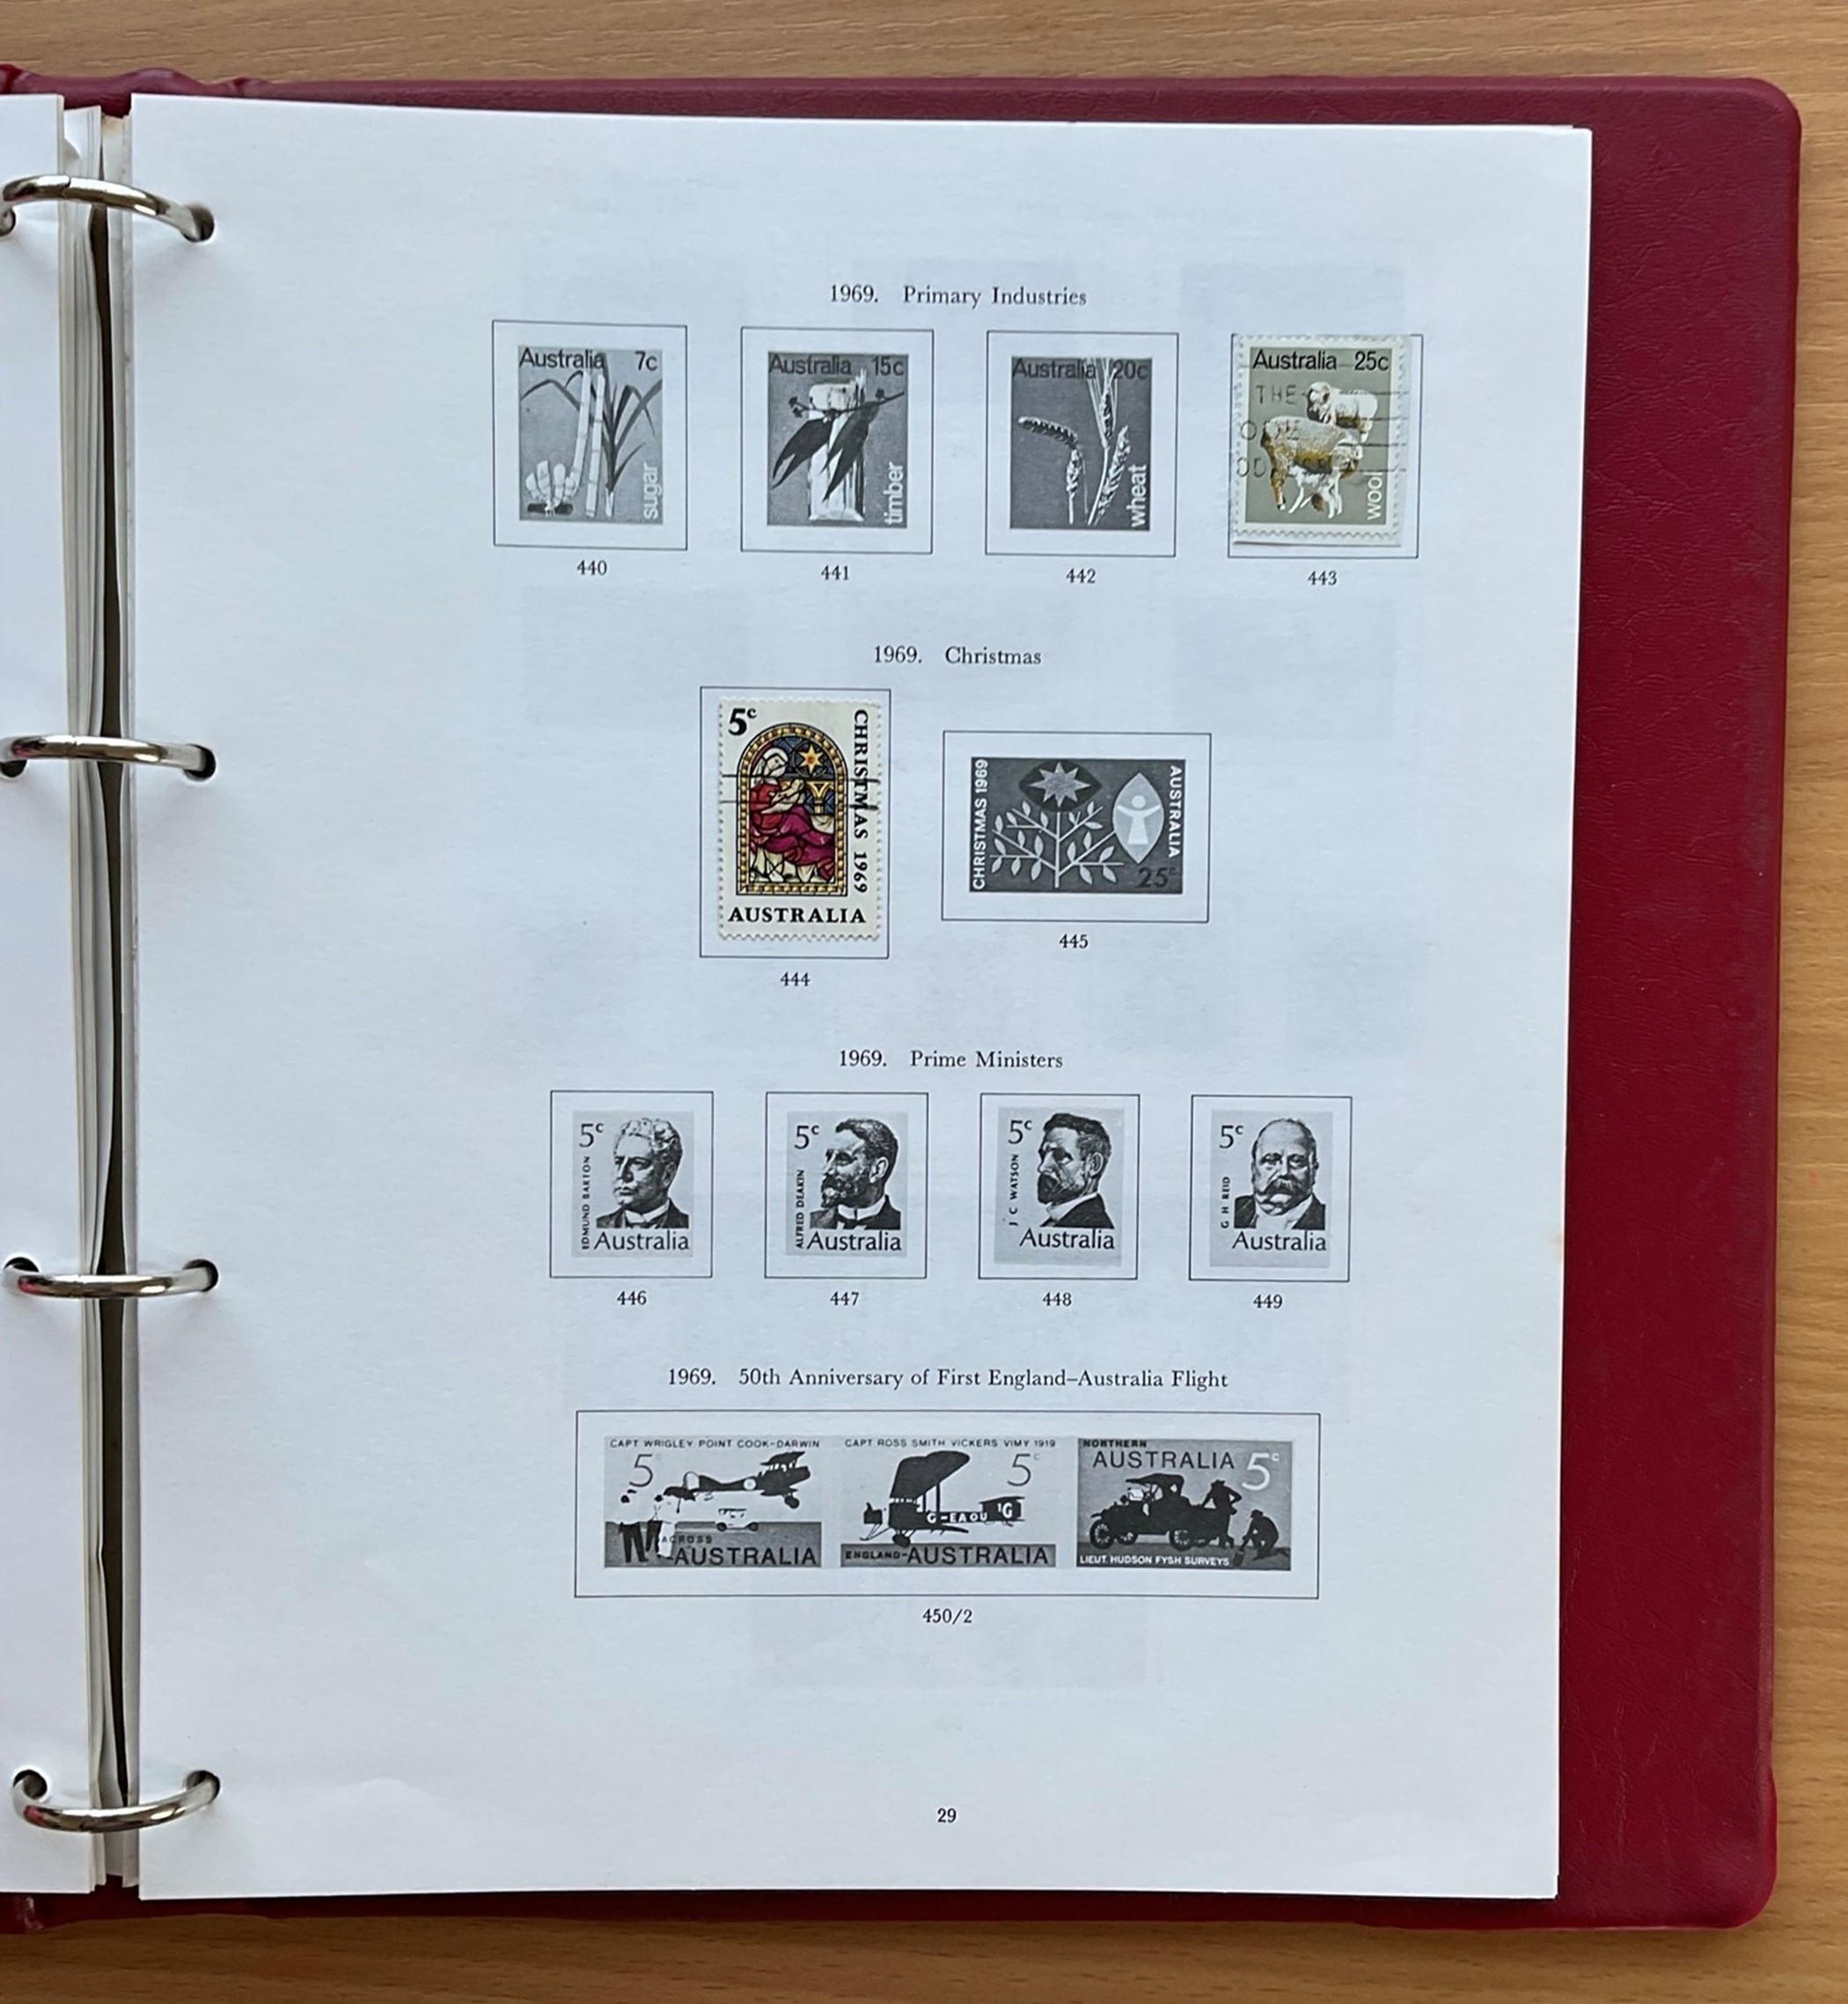 Stanley Gibbons Commonwealth of Australia Album with over 150 Stamps, has pictures and information - Image 3 of 3